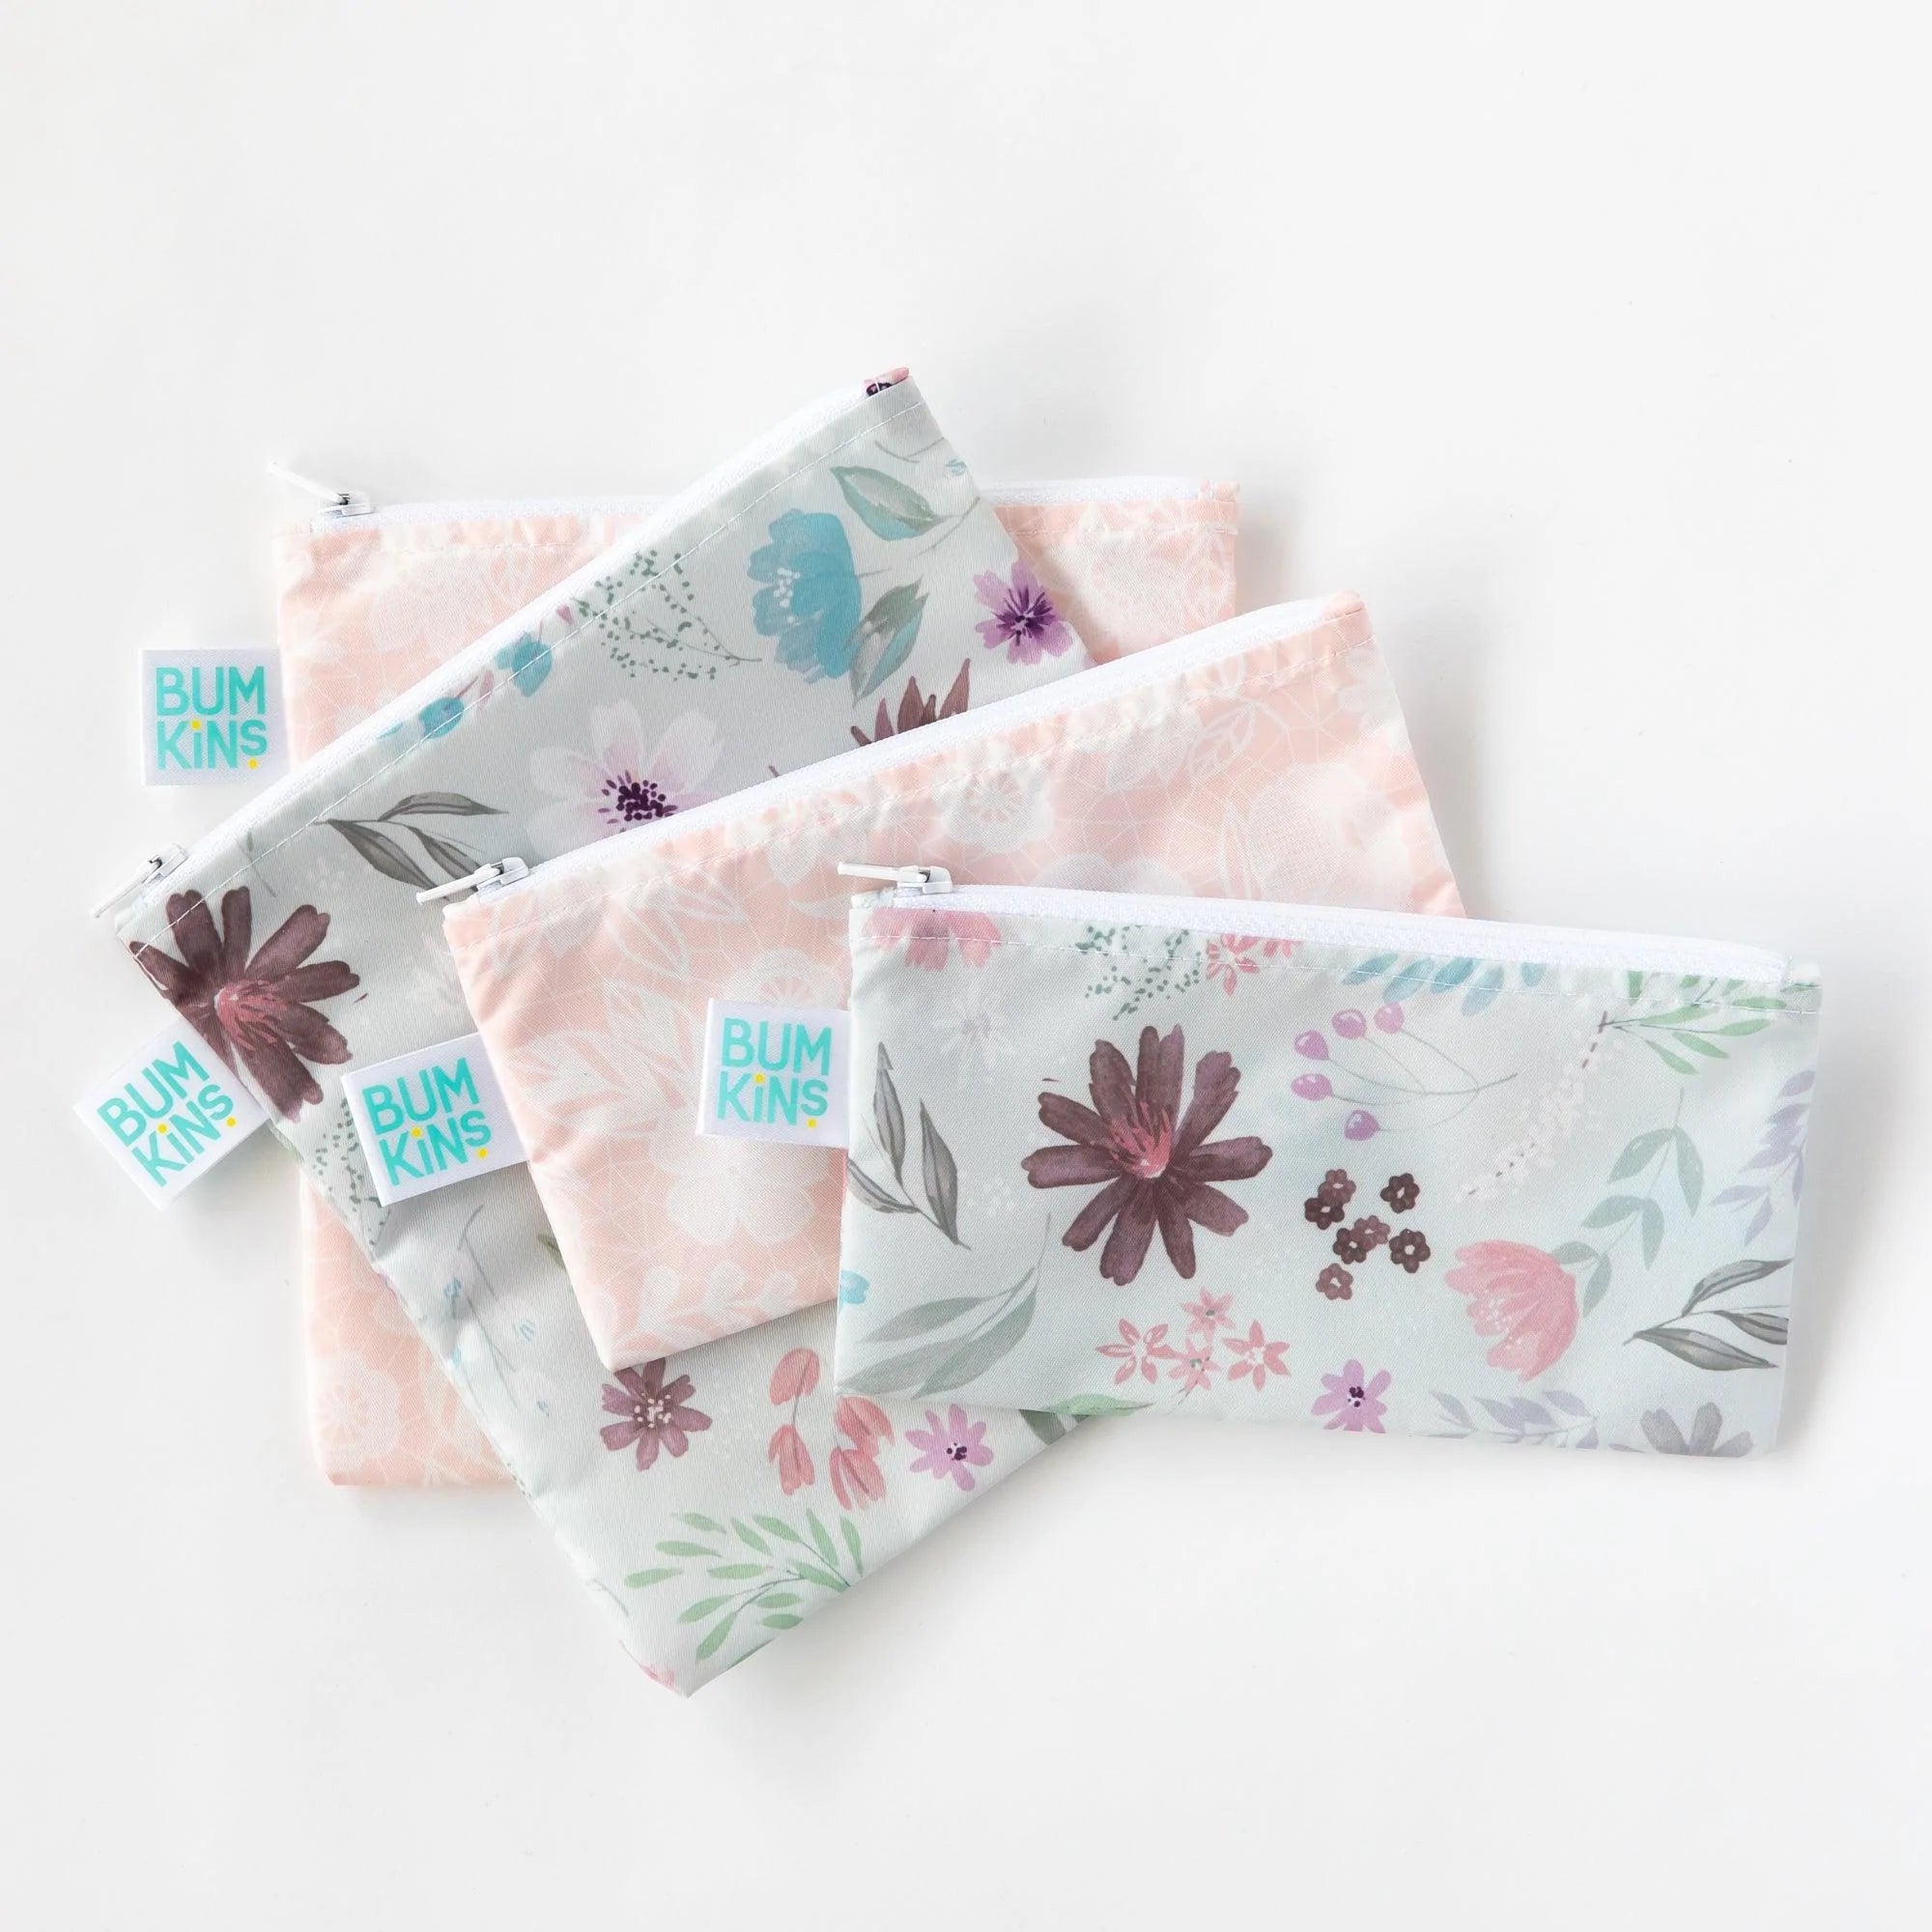 Reusable Snack Bag, Small 2-Pack: Floral & Lace - Bumkins